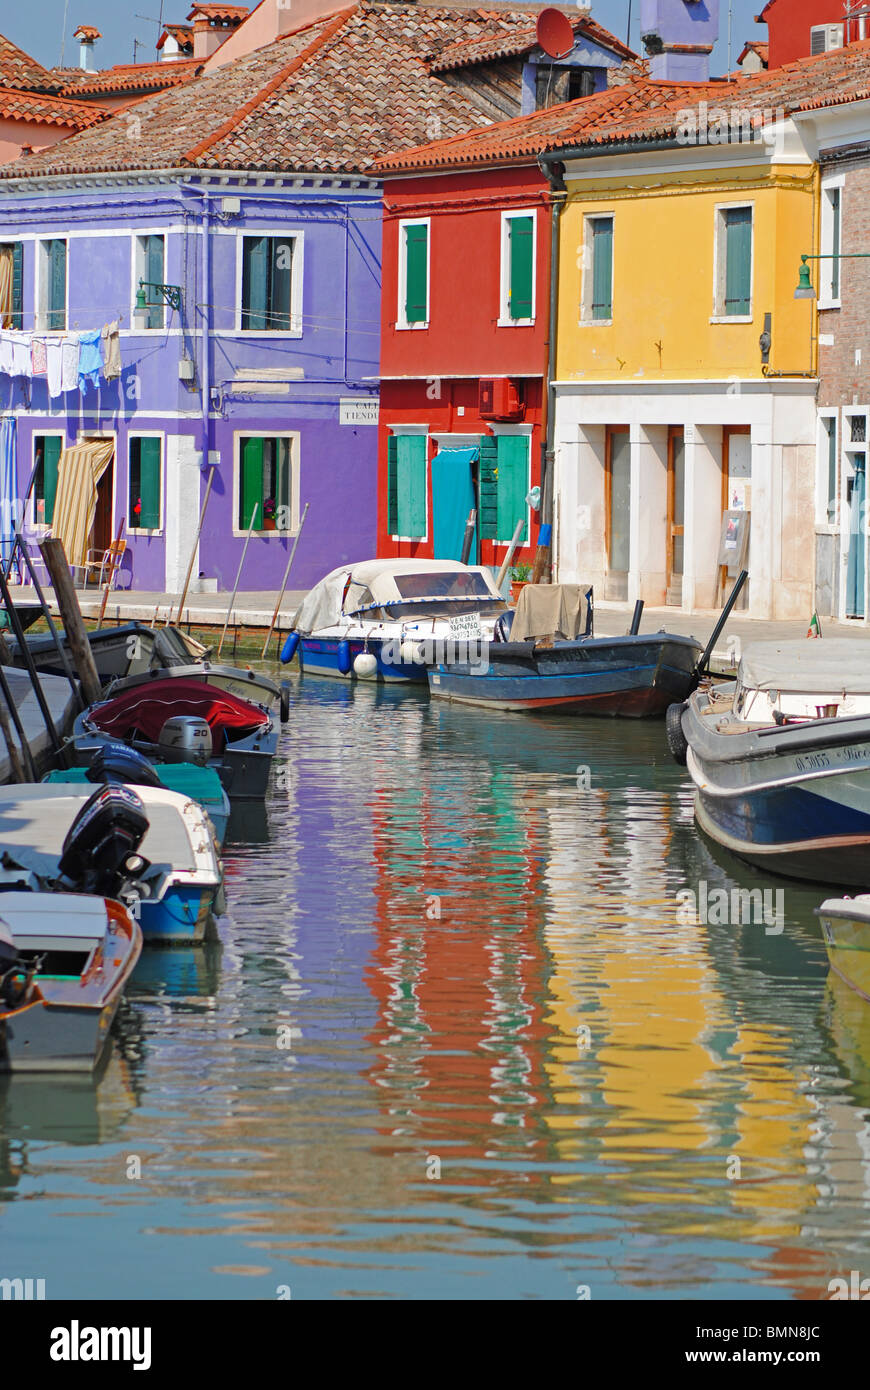 Colorful houses reflected in a canal, Burano, Italy Stock Photo